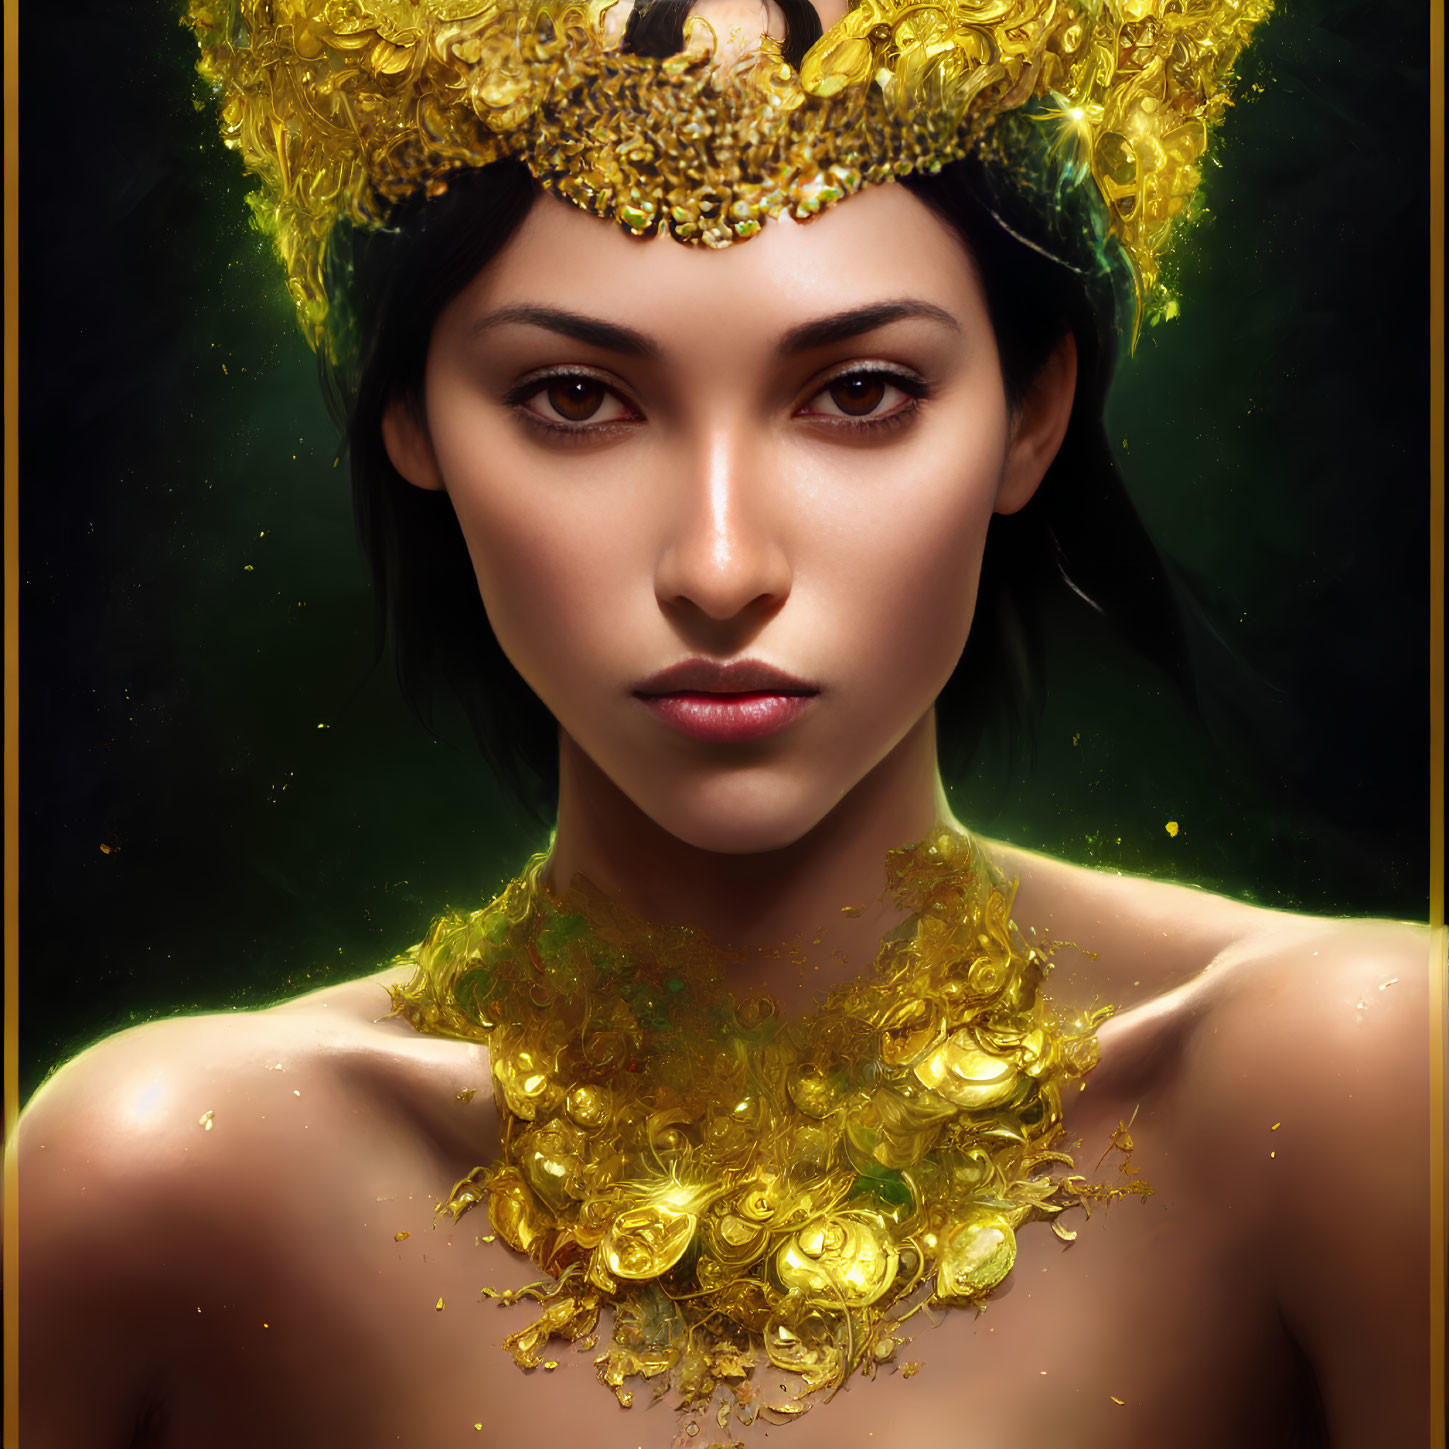 Portrait of Woman in Golden Crown and Necklace on Dark Background